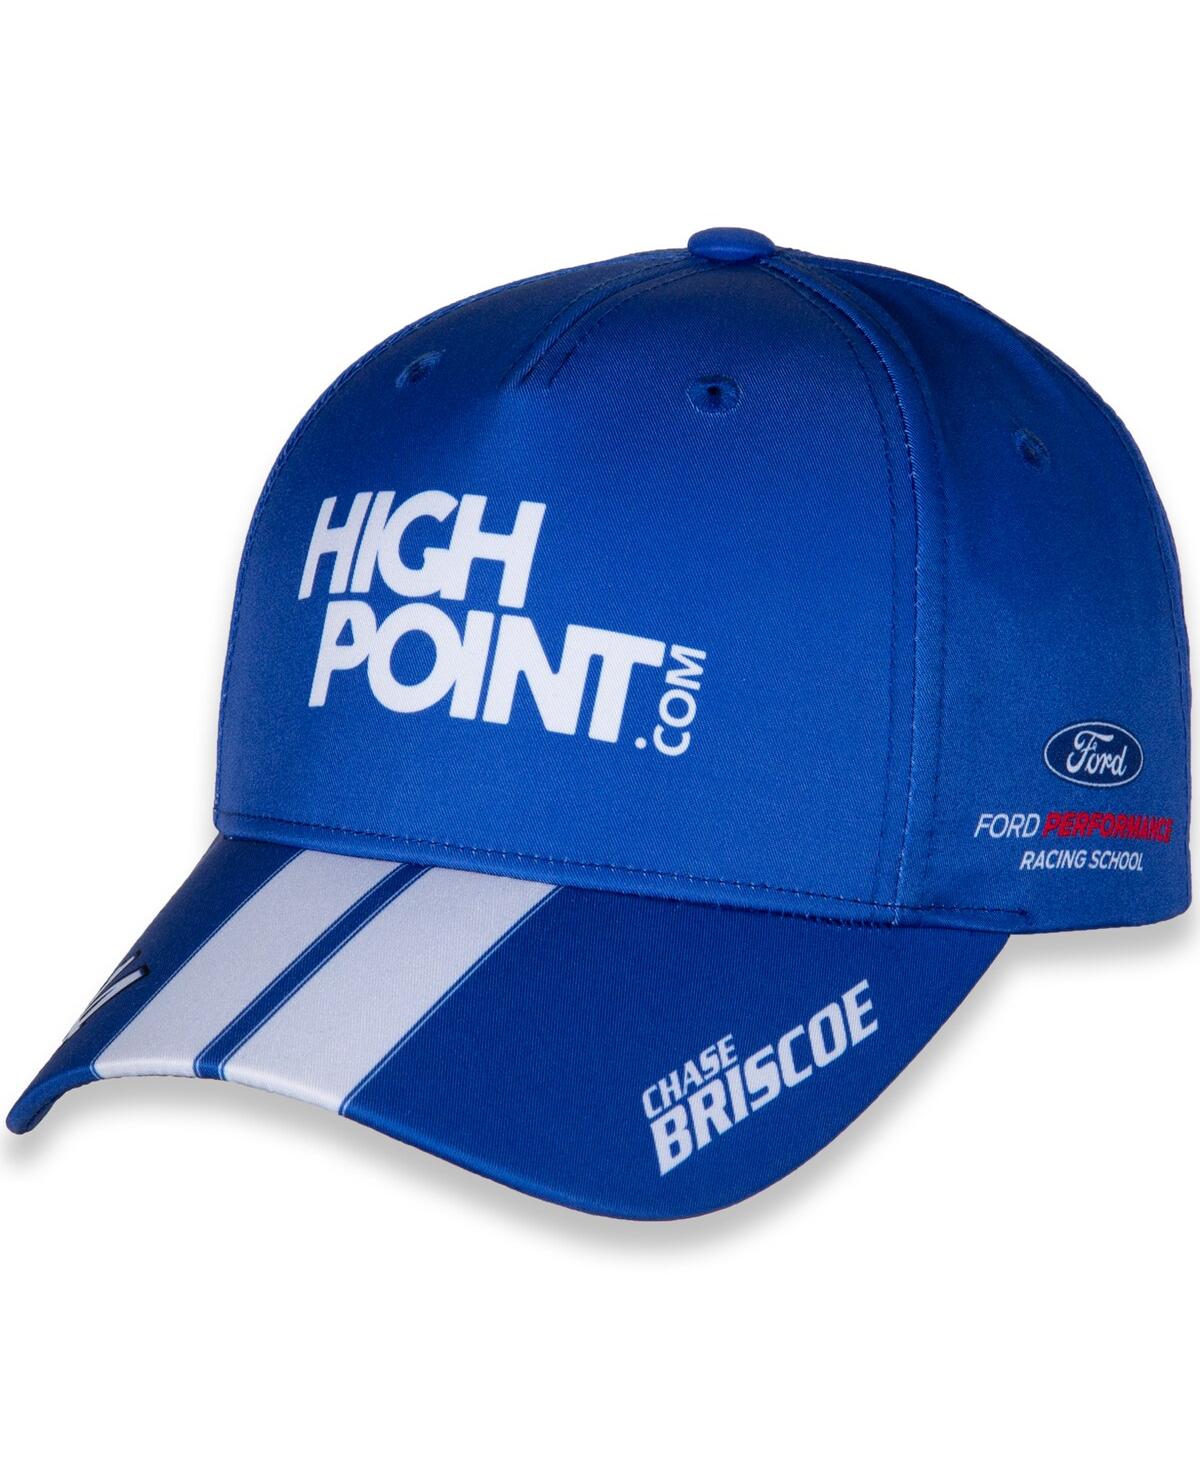 Stewart-haas Racing Team Collection Men's  Royal, White Chase Briscoe Highpoint.com Uniform Adjustabl In Royal,white